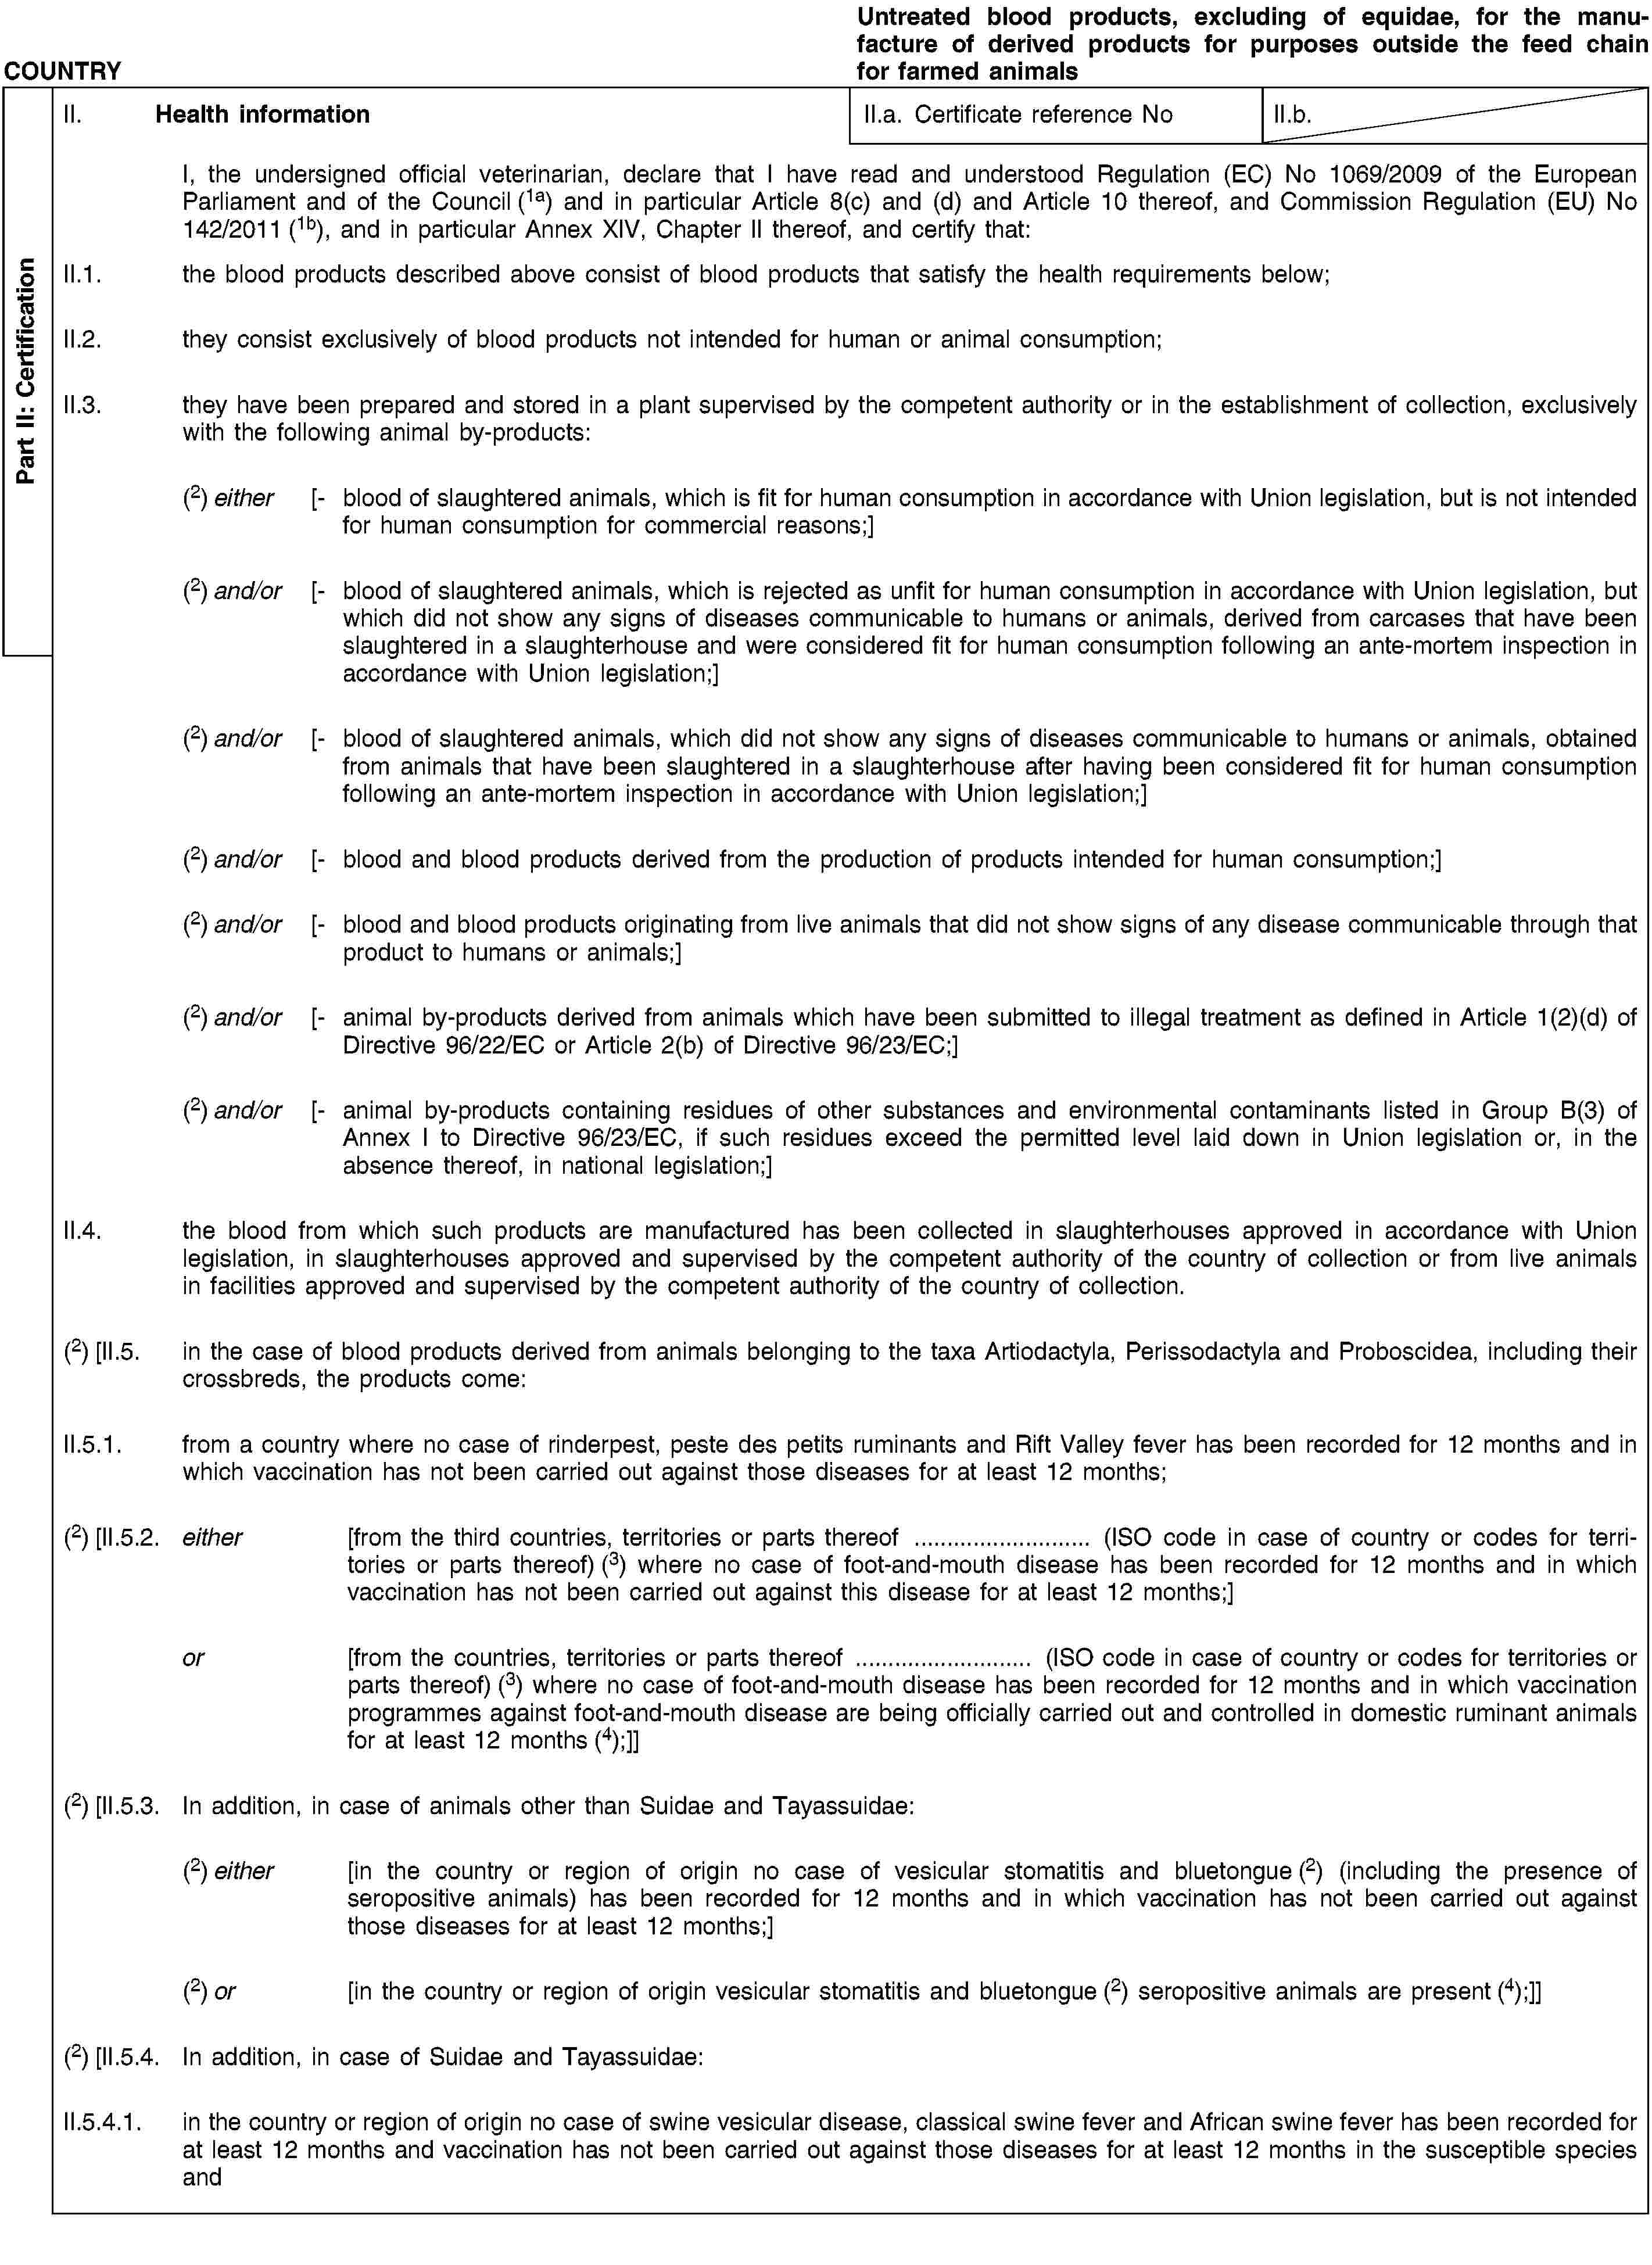 Part II: CertificationCOUNTRYUntreated blood products, excluding of equidae, for the manufacture of derived products for purposes outside the feed chain for farmed animalsII. Health informationII.a. Certificate reference NoII.b.I, the undersigned official veterinarian, declare that I have read and understood Regulation (EC) No 1069/2009 of the European Parliament and of the Council (1a) and in particular Article 8(c) and (d) and Article 10 thereof, and Commission Regulation (EU) No 142/2011 (1b), and in particular Annex XIV, Chapter II thereof, and certify that:II.1. the blood products described above consist of blood products that satisfy the health requirements below;II.2. they consist exclusively of blood products not intended for human or animal consumption;II.3. they have been prepared and stored in a plant supervised by the competent authority or in the establishment of collection, exclusively with the following animal by-products:(2) either [- blood of slaughtered animals, which is fit for human consumption in accordance with Union legislation, but is not intended for human consumption for commercial reasons;](2) and/or [- blood of slaughtered animals, which is rejected as unfit for human consumption in accordance with Union legislation, but which did not show any signs of diseases communicable to humans or animals, derived from carcases that have been slaughtered in a slaughterhouse and were considered fit for human consumption following an ante-mortem inspection in accordance with Union legislation;](2) and/or [- blood of slaughtered animals, which did not show any signs of diseases communicable to humans or animals, obtained from animals that have been slaughtered in a slaughterhouse after having been considered fit for human consumption following an ante-mortem inspection in accordance with Union legislation;](2) and/or [- blood and blood products derived from the production of products intended for human consumption;](2) and/or [- blood and blood products originating from live animals that did not show signs of any disease communicable through that product to humans or animals;](2) and/or [- animal by-products derived from animals which have been submitted to illegal treatment as defined in Article 1(2)(d) of Directive 96/22/EC or Article 2(b) of Directive 96/23/EC;](2) and/or [- animal by-products containing residues of other substances and environmental contaminants listed in Group B(3) of Annex I to Directive 96/23/EC, if such residues exceed the permitted level laid down in Union legislation or, in the absence thereof, in national legislation;]II.4. the blood from which such products are manufactured has been collected in slaughterhouses approved in accordance with Union legislation, in slaughterhouses approved and supervised by the competent authority of the country of collection or from live animals in facilities approved and supervised by the competent authority of the country of collection.(2) [II.5. in the case of blood products derived from animals belonging to the taxa Artiodactyla, Perissodactyla and Proboscidea, including their crossbreds, the products come:II.5.1. from a country where no case of rinderpest, peste des petits ruminants and Rift Valley fever has been recorded for 12 months and in which vaccination has not been carried out against those diseases for at least 12 months;(2) [II.5.2. either [from the third countries, territories or parts thereof … (ISO code in case of country or codes for territories or parts thereof) (3) where no case of foot-and-mouth disease has been recorded for 12 months and in which vaccination has not been carried out against this disease for at least 12 months;]or [from the countries, territories or parts thereof … (ISO code in case of country or codes for territories or parts thereof) (3) where no case of foot-and-mouth disease has been recorded for 12 months and in which vaccination programmes against foot-and-mouth disease are being officially carried out and controlled in domestic ruminant animals for at least 12 months (4);]](2) [II.5.3. In addition, in case of animals other than Suidae and Tayassuidae:(2) either [in the country or region of origin no case of vesicular stomatitis and bluetongue (2) (including the presence of seropositive animals) has been recorded for 12 months and in which vaccination has not been carried out against those diseases for at least 12 months;](2) or [in the country or region of origin vesicular stomatitis and bluetongue (2) seropositive animals are present (4);]](2) [II.5.4. In addition, in case of Suidae and Tayassuidae:II.5.4.1. in the country or region of origin no case of swine vesicular disease, classical swine fever and African swine fever has been recorded for at least 12 months and vaccination has not been carried out against those diseases for at least 12 months in the susceptible species and